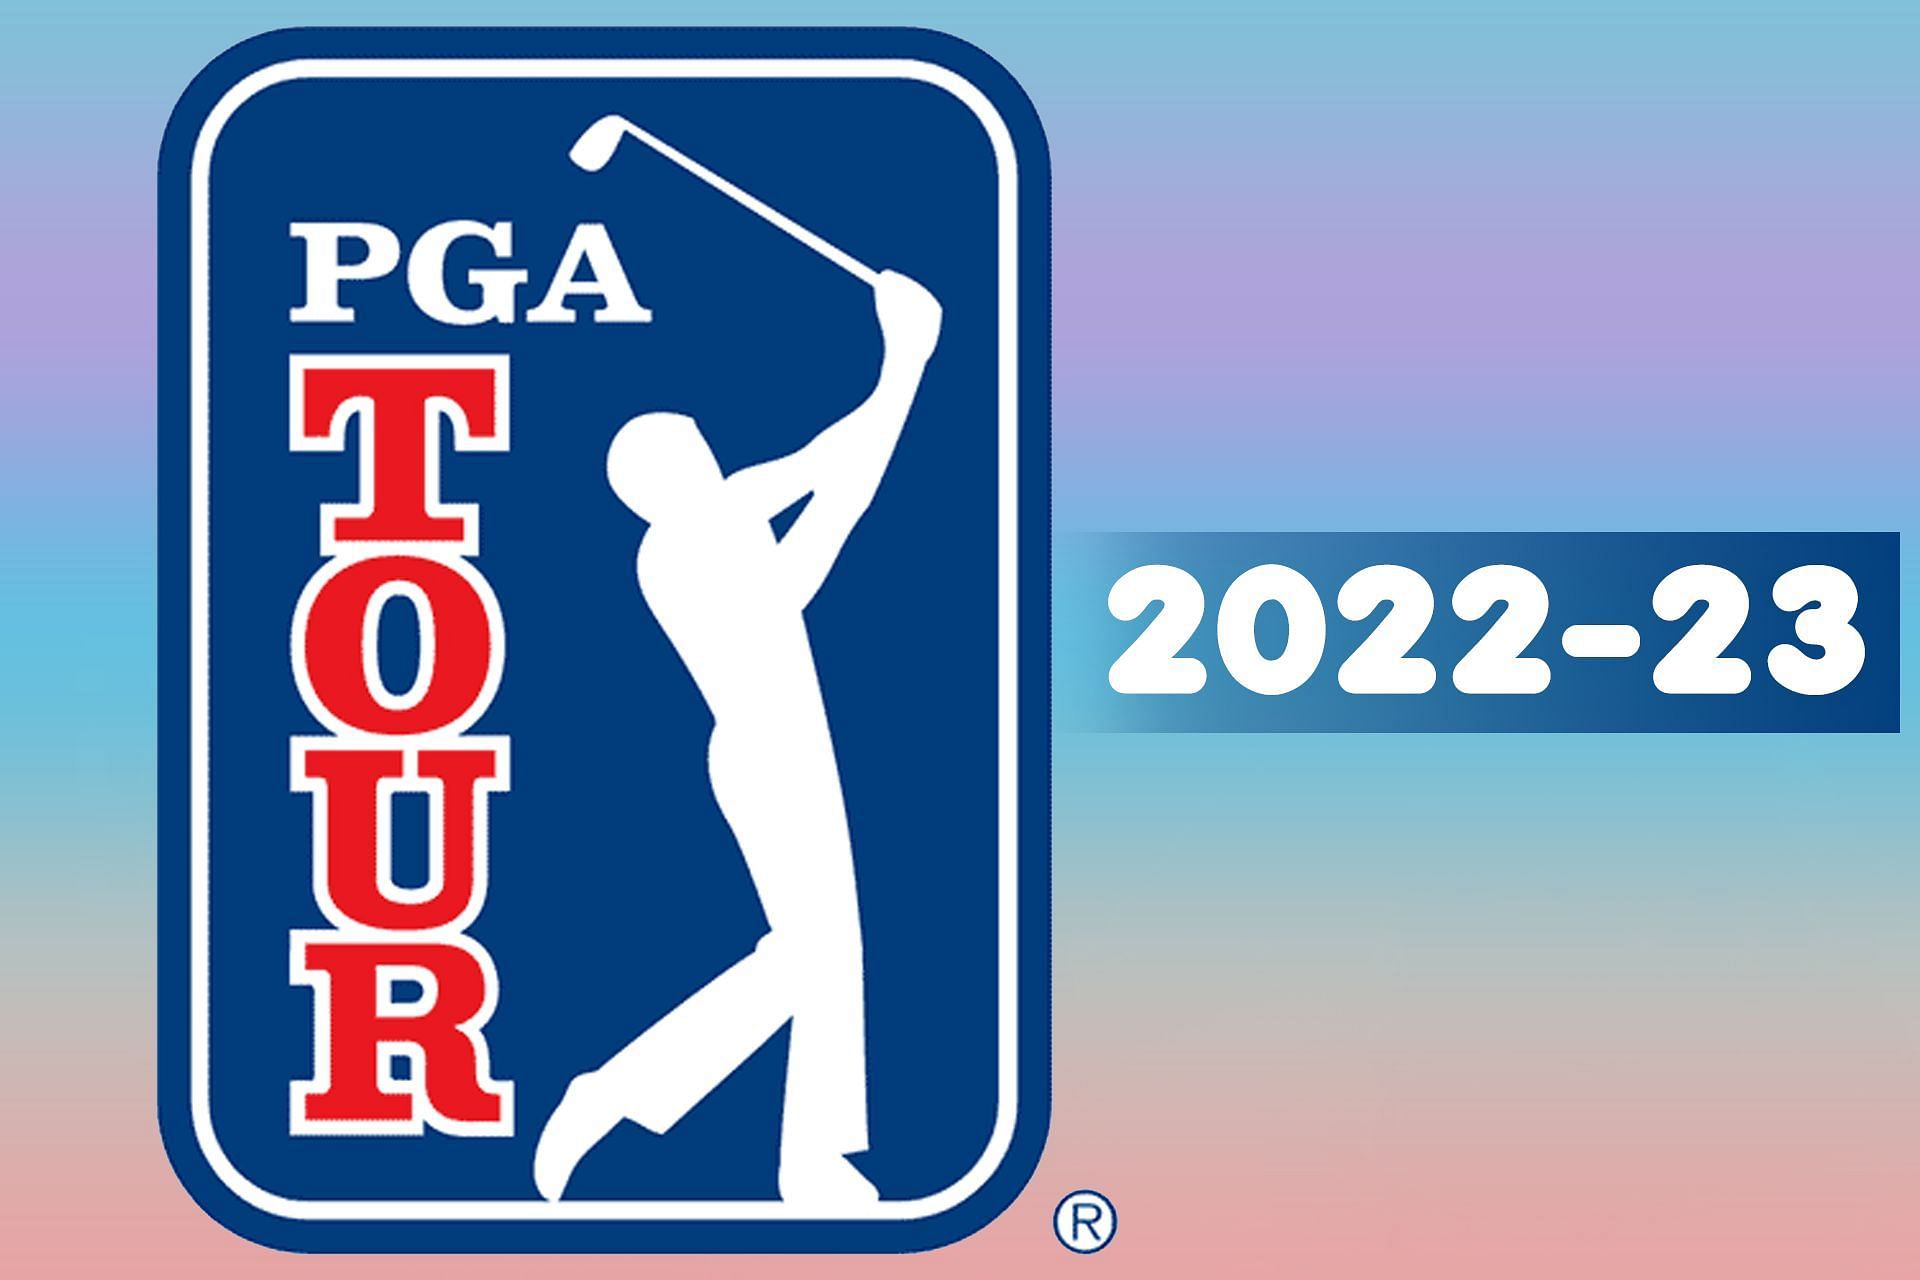 What is the prize money of the PGA Tour 2022?